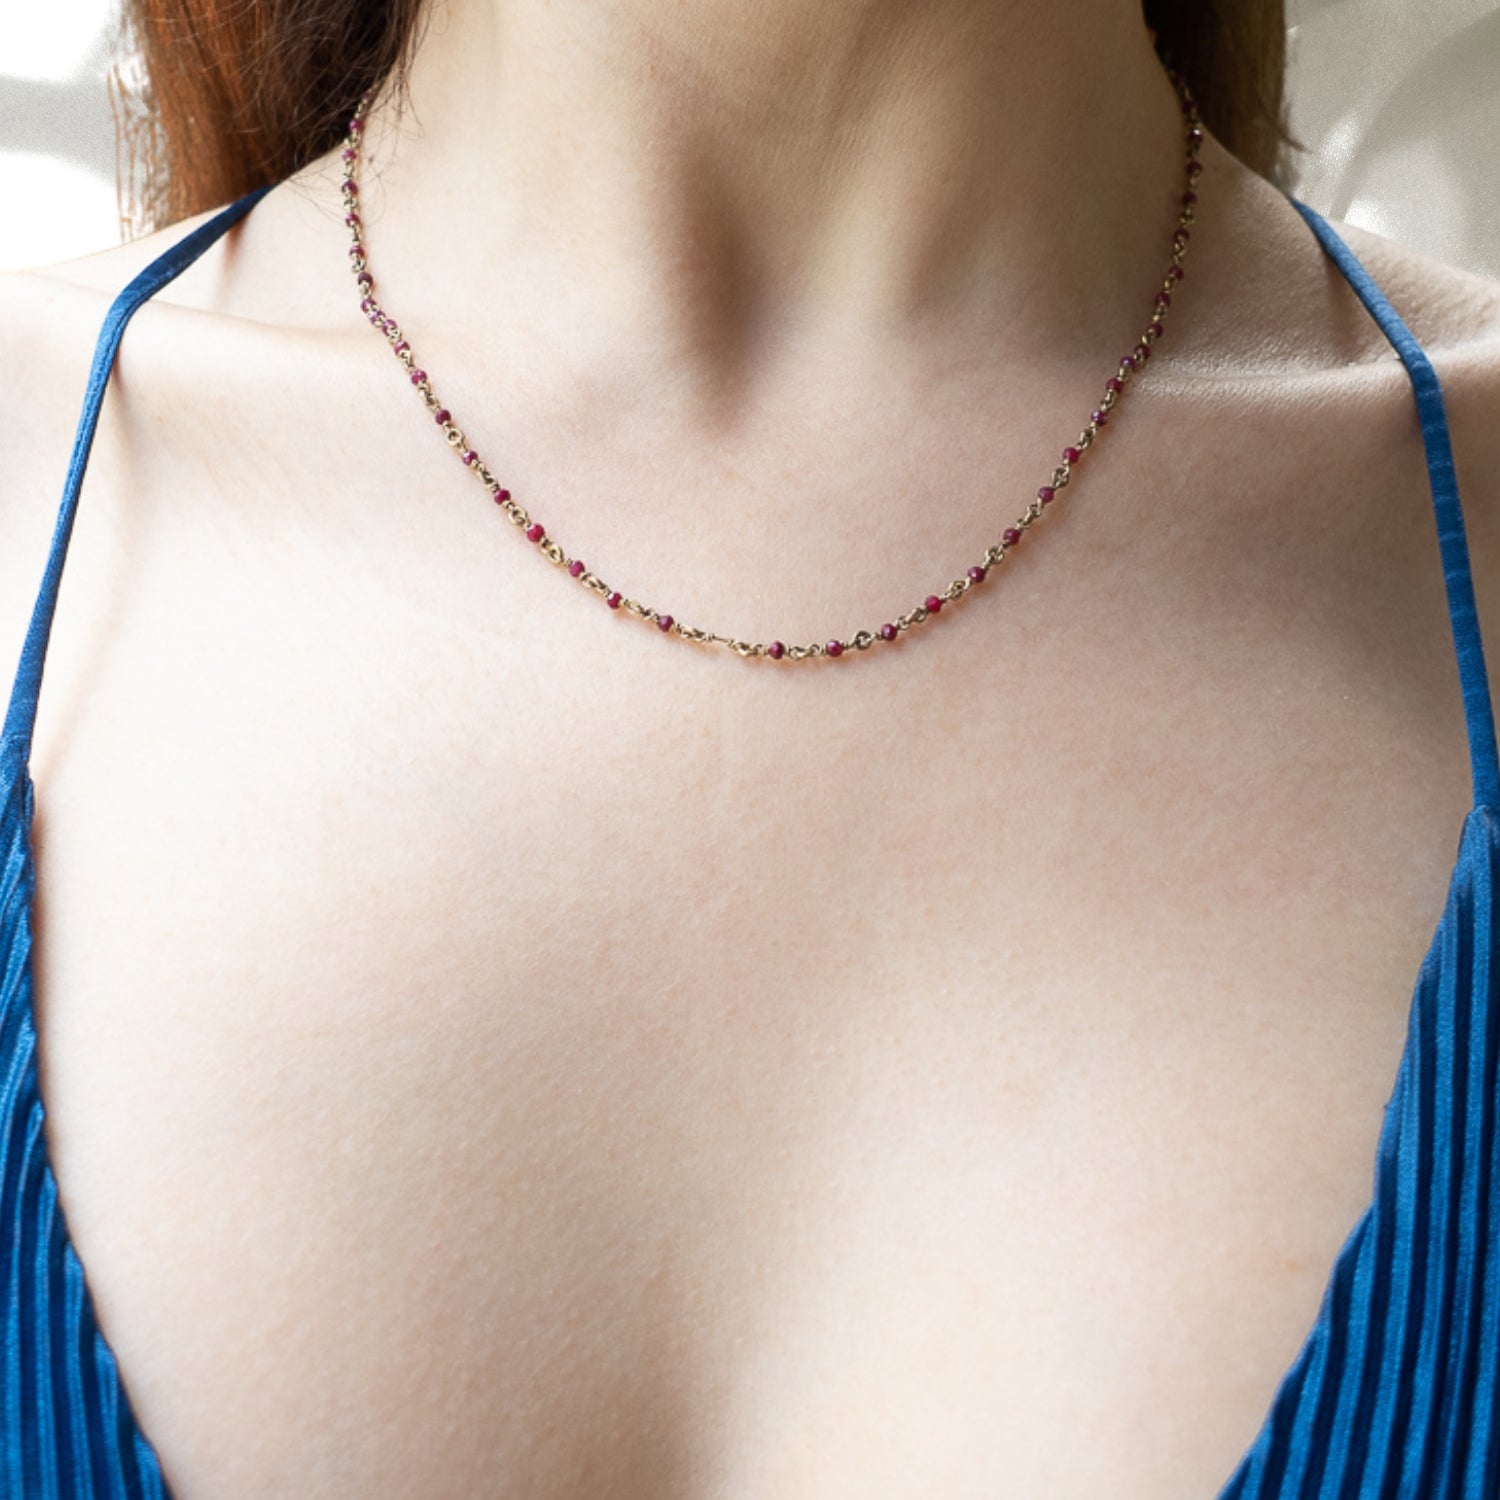 The Karya Ruby Gold Necklace beautifully adorns the neckline of the model, enhancing her natural beauty and adding a touch of luxury to her ensemble.